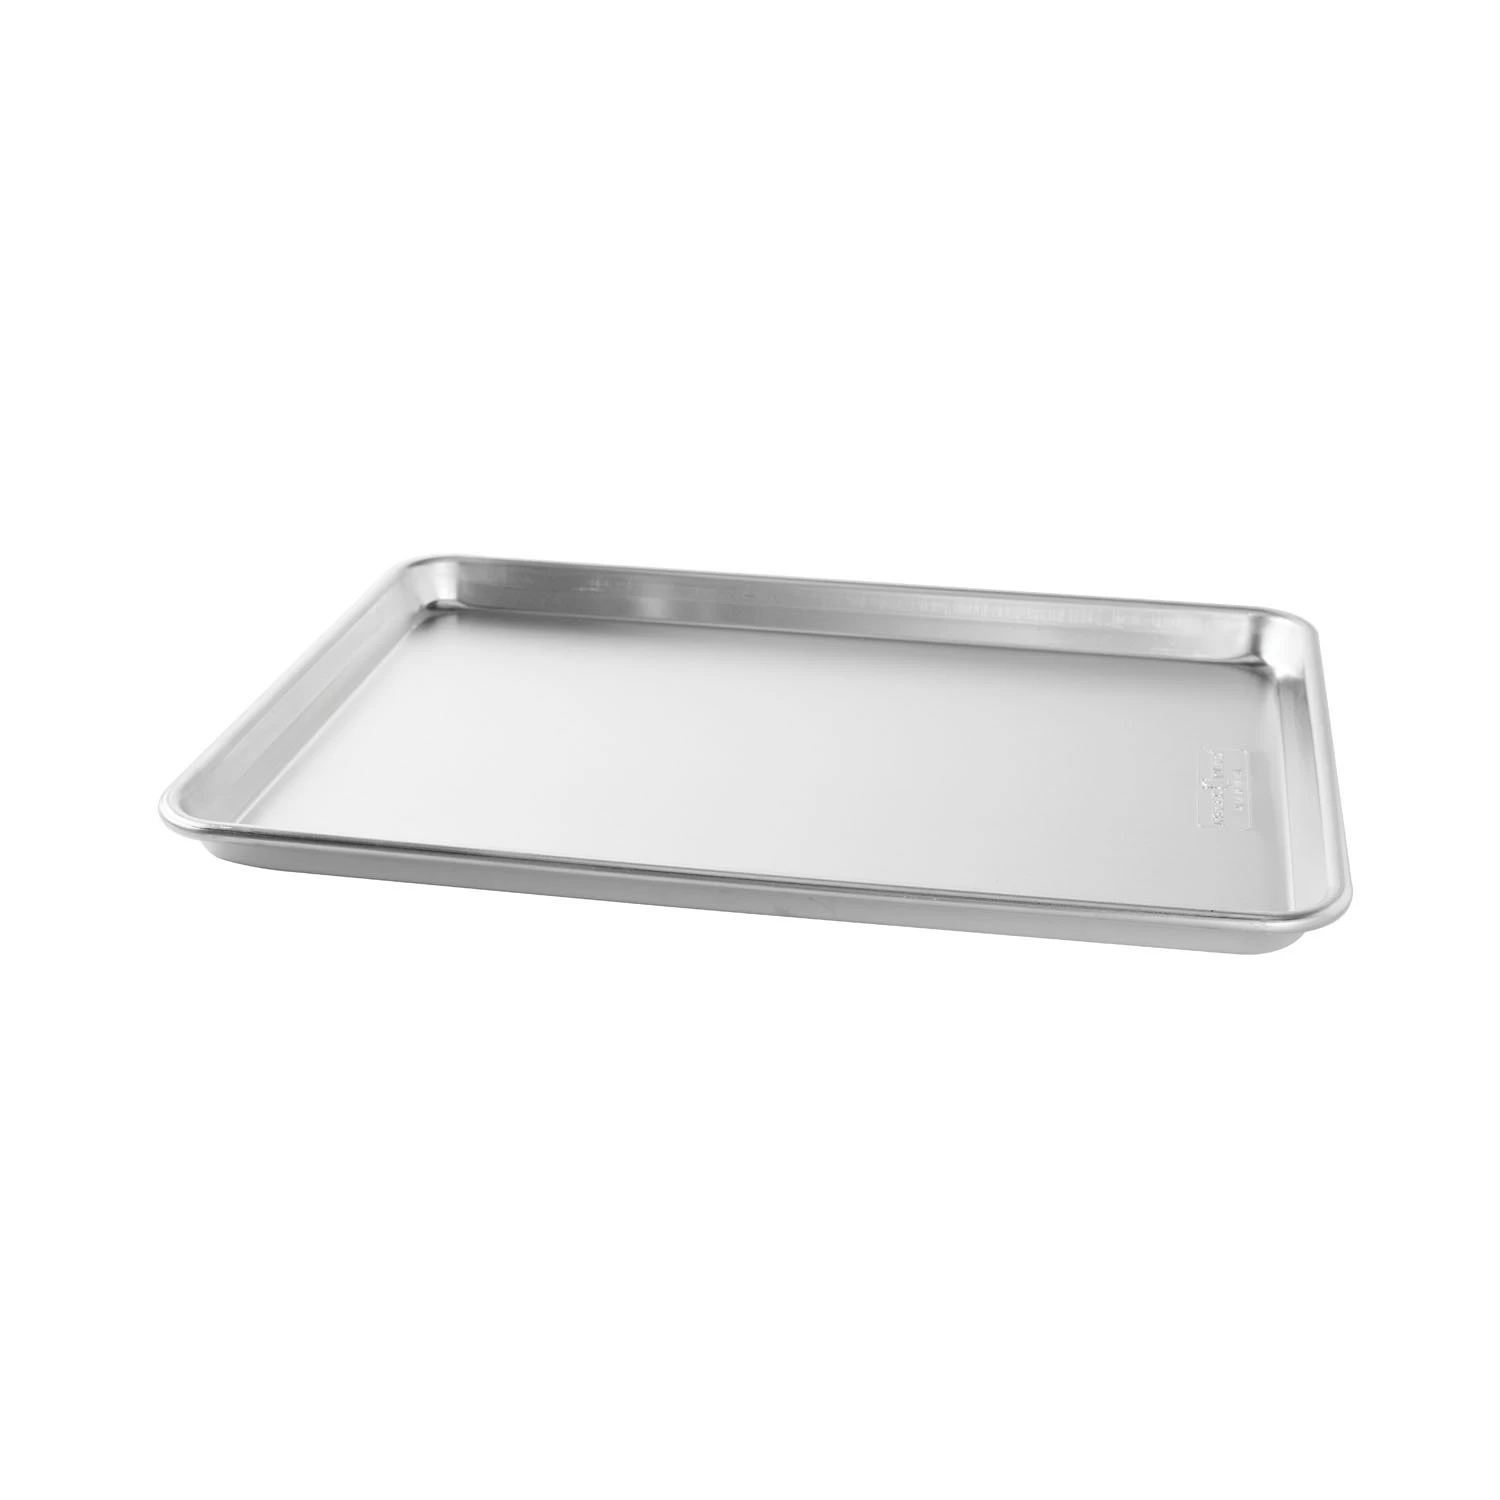 Stainless Steel Commercial Baker Half Sheet china, Kitchenware Supplier china